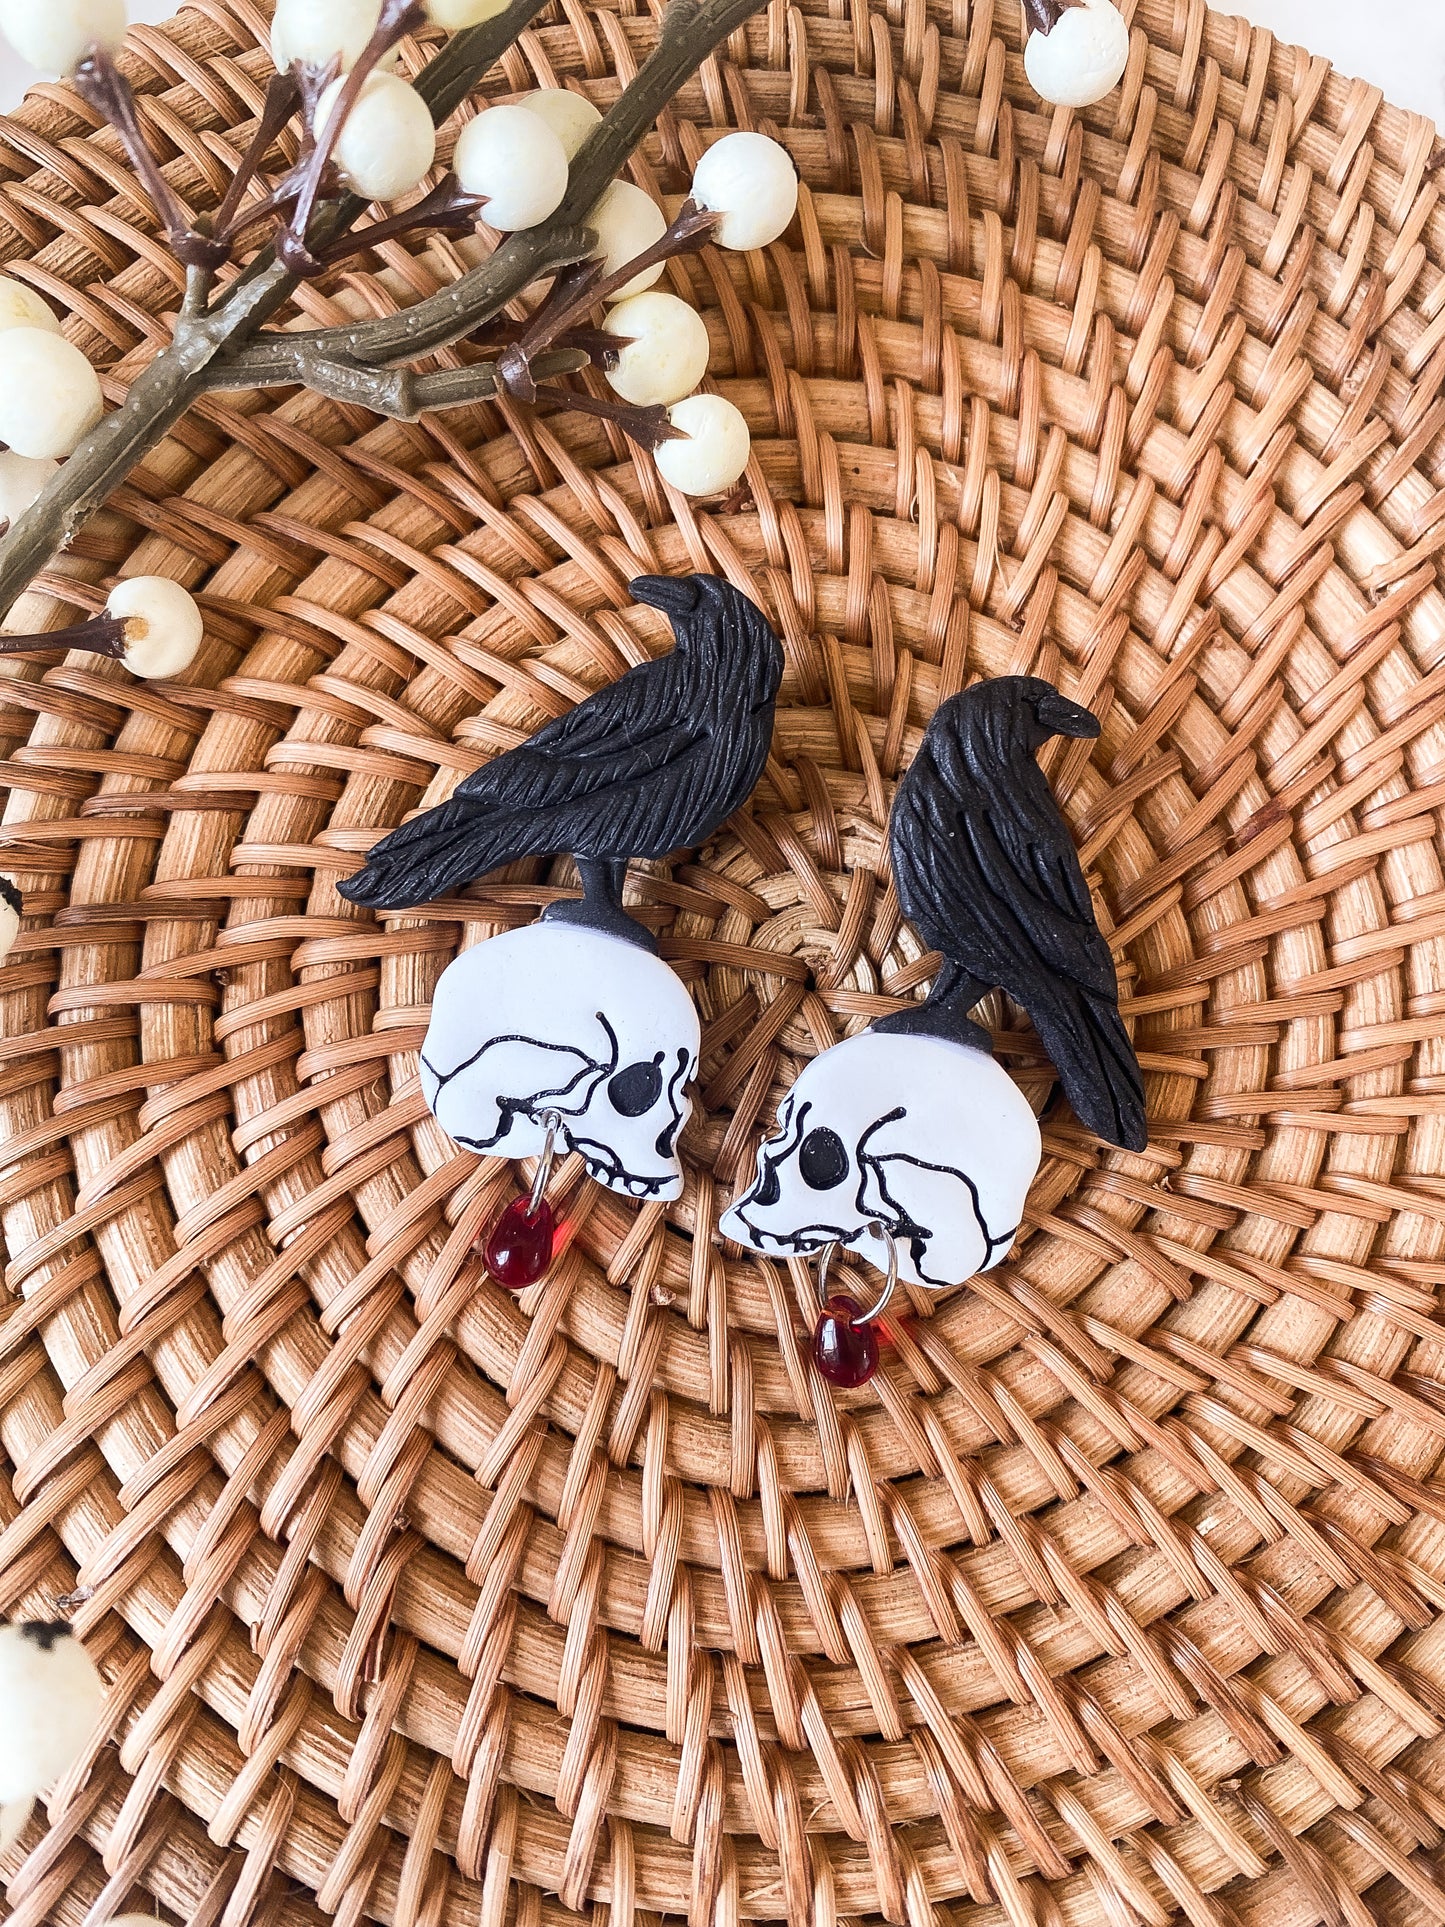 The Lillet // Raven and Skull Studs